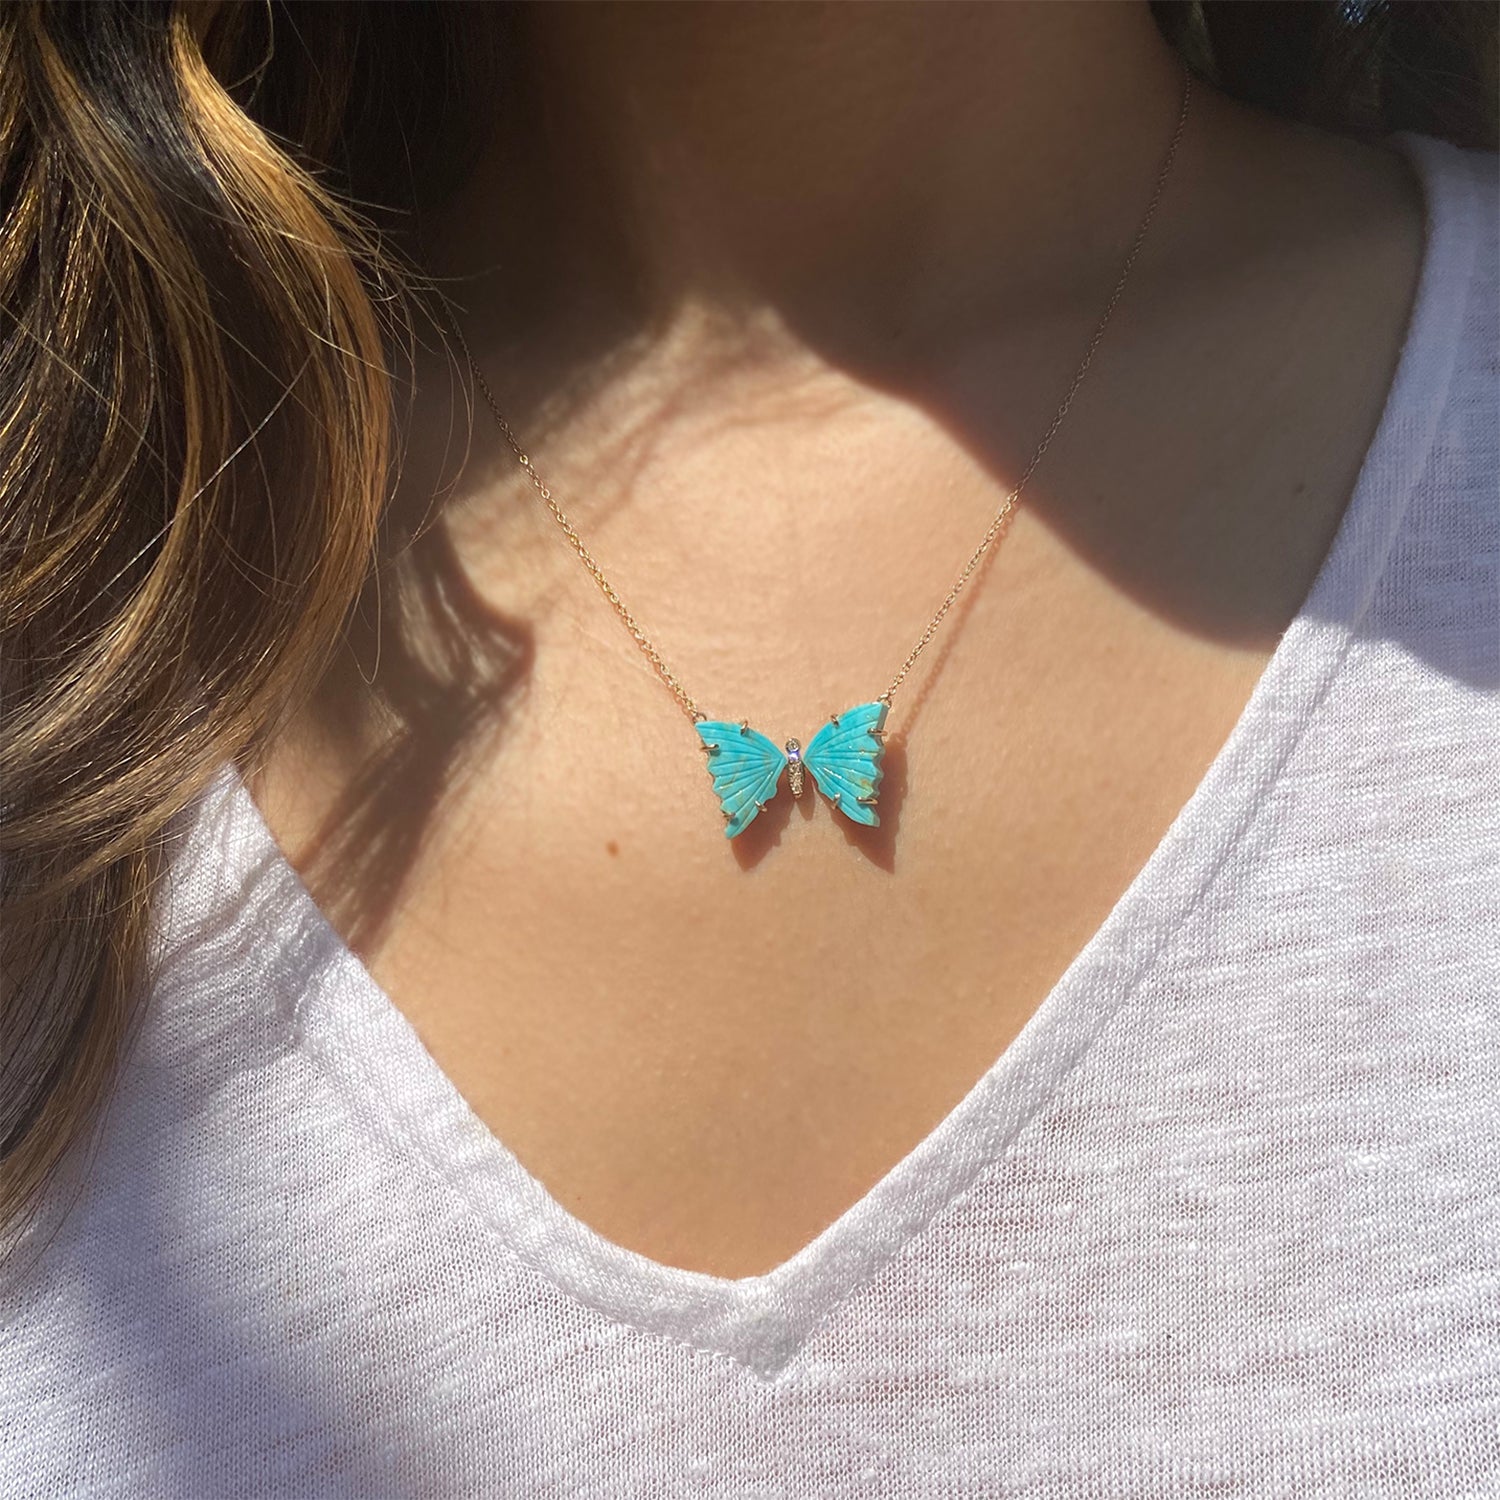 Turquoise Butterfly Necklace With Diamonds